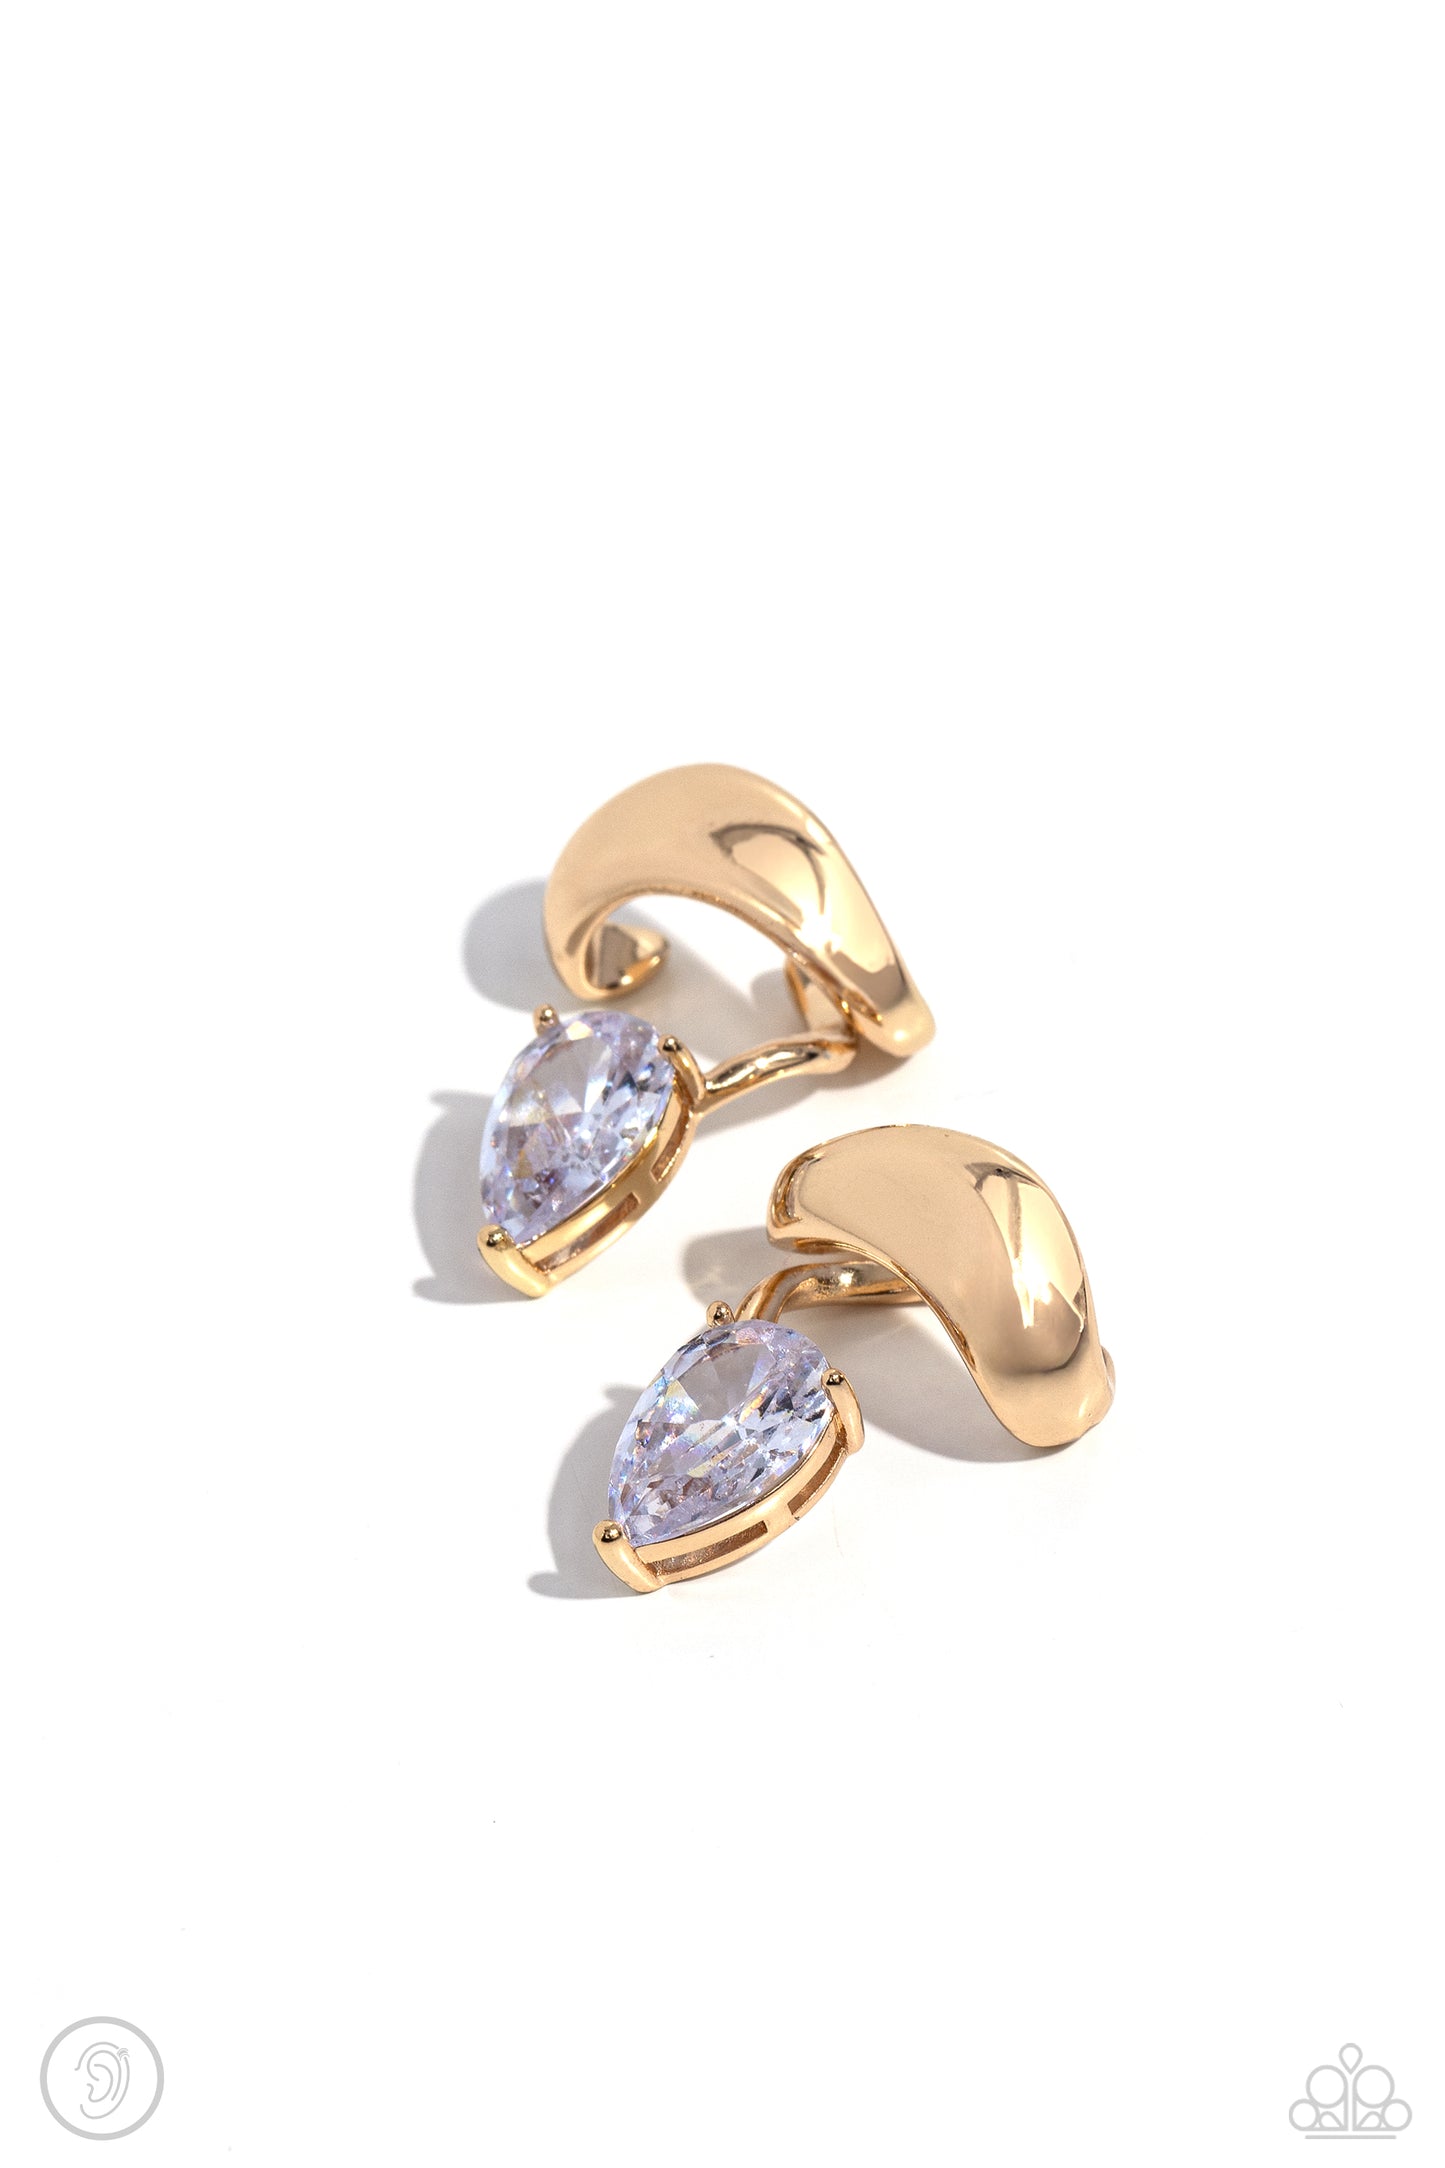 <p>Paparazzi Accessories - Twisting Teardrop - Gold Ear Cuffs fluttering atop a pronged gold fitting, a white gem teardrop shines from the ear. Features a smooth surface for sliding ability to desired position on the ear. Due to its structure, adjusting capability is limited.</p> <p><i>Sold as one pair of cuff earrings.</i></p>